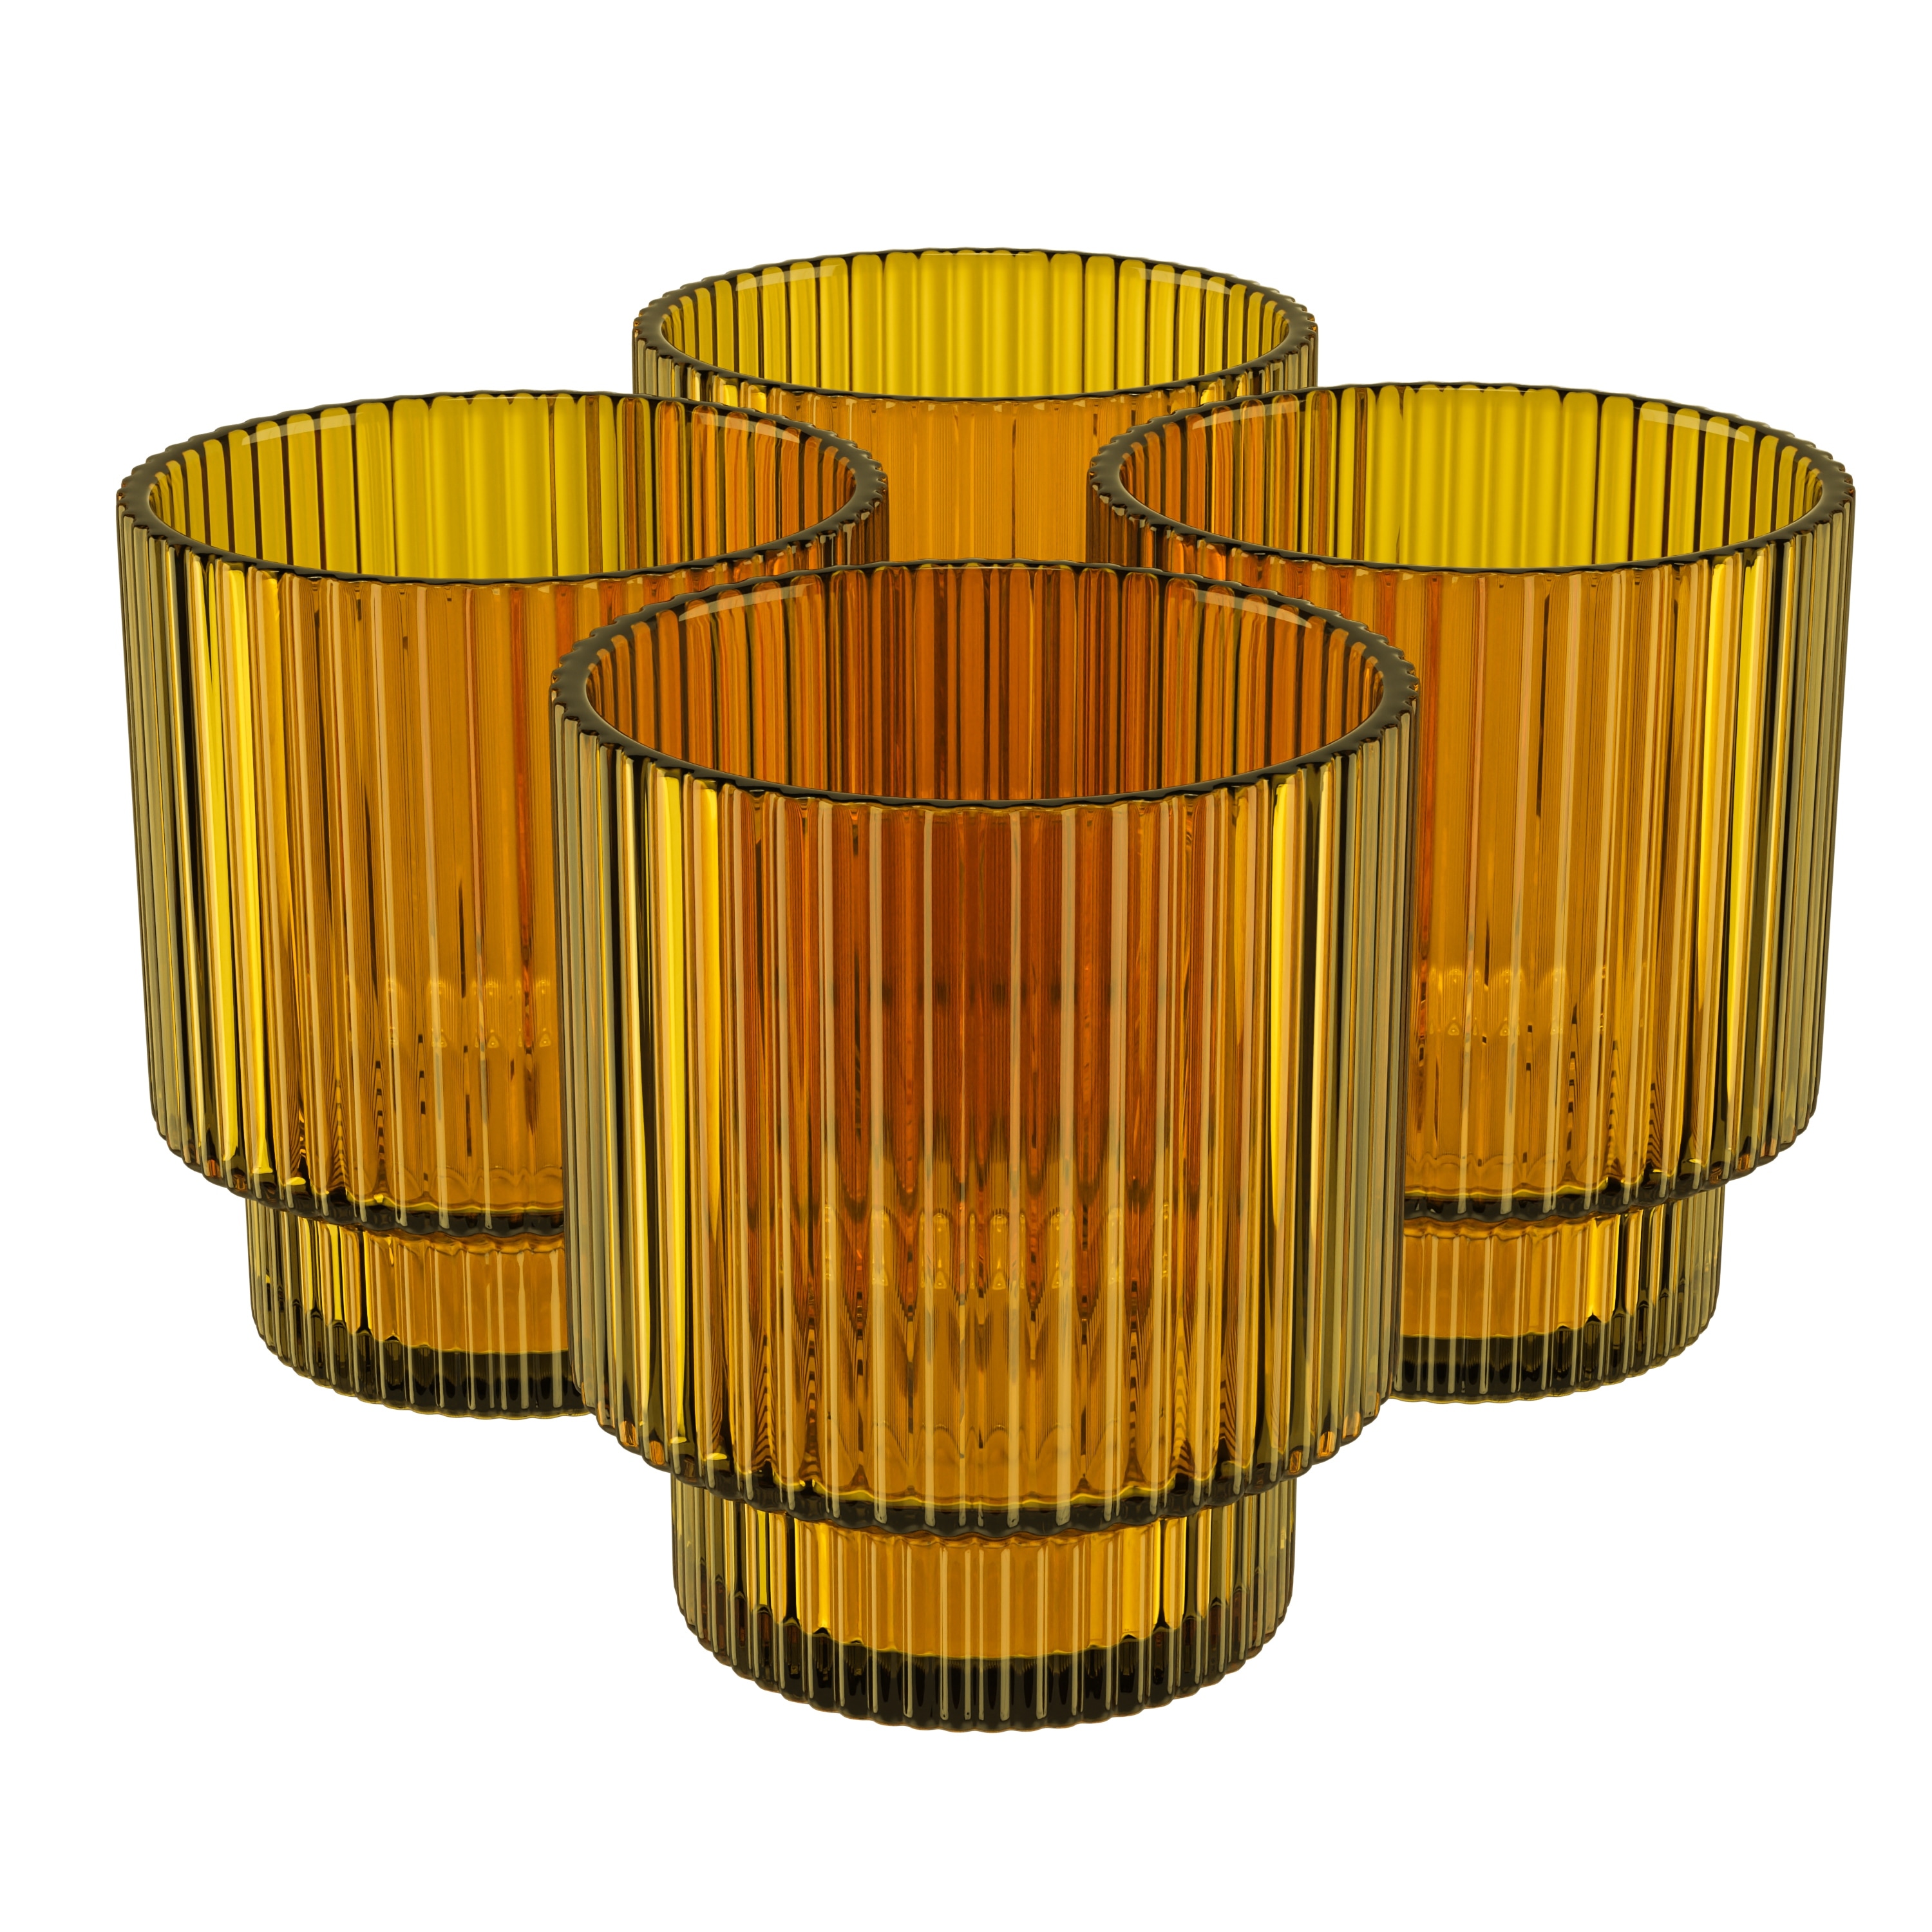 https://ak1.ostkcdn.com/images/products/is/images/direct/5725ed9796e7d46bbd1588360caeb3d71ce326b0/American-Atelier-Vintage-Art-Deco-Fluted-Drinking-Glasses-Set-of-4.jpg